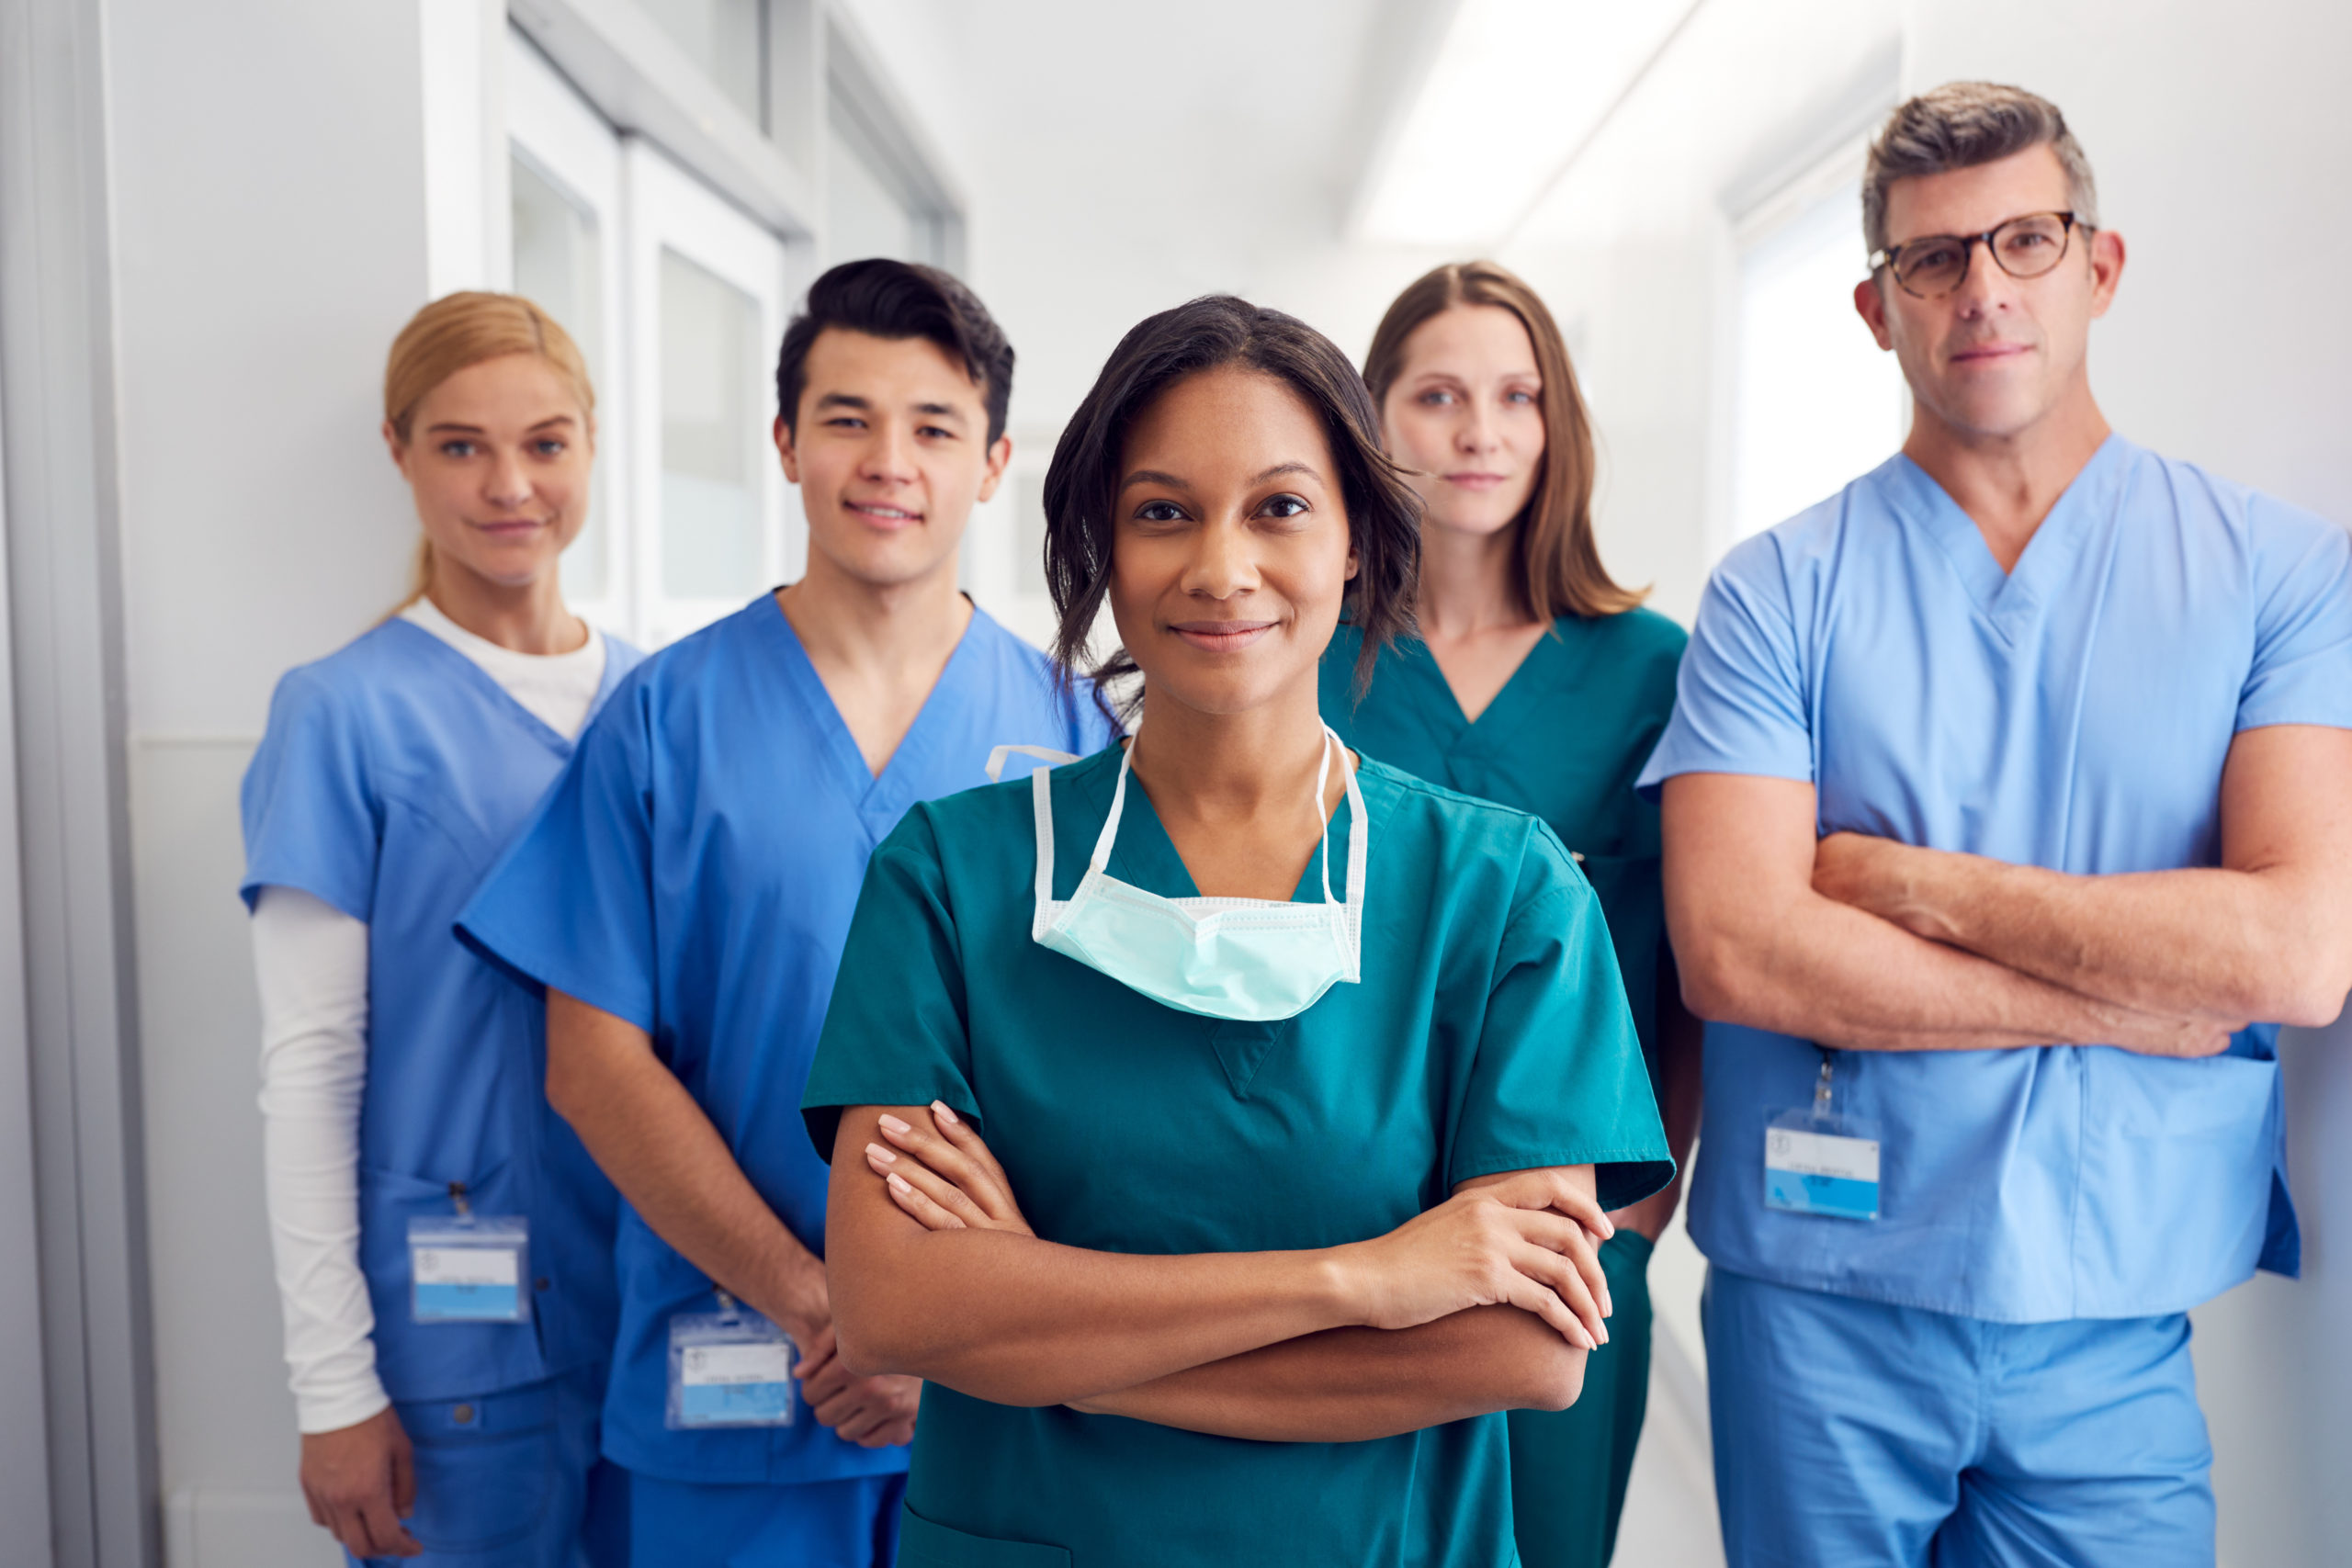 Starting Your Nursing Career – The Local Voice